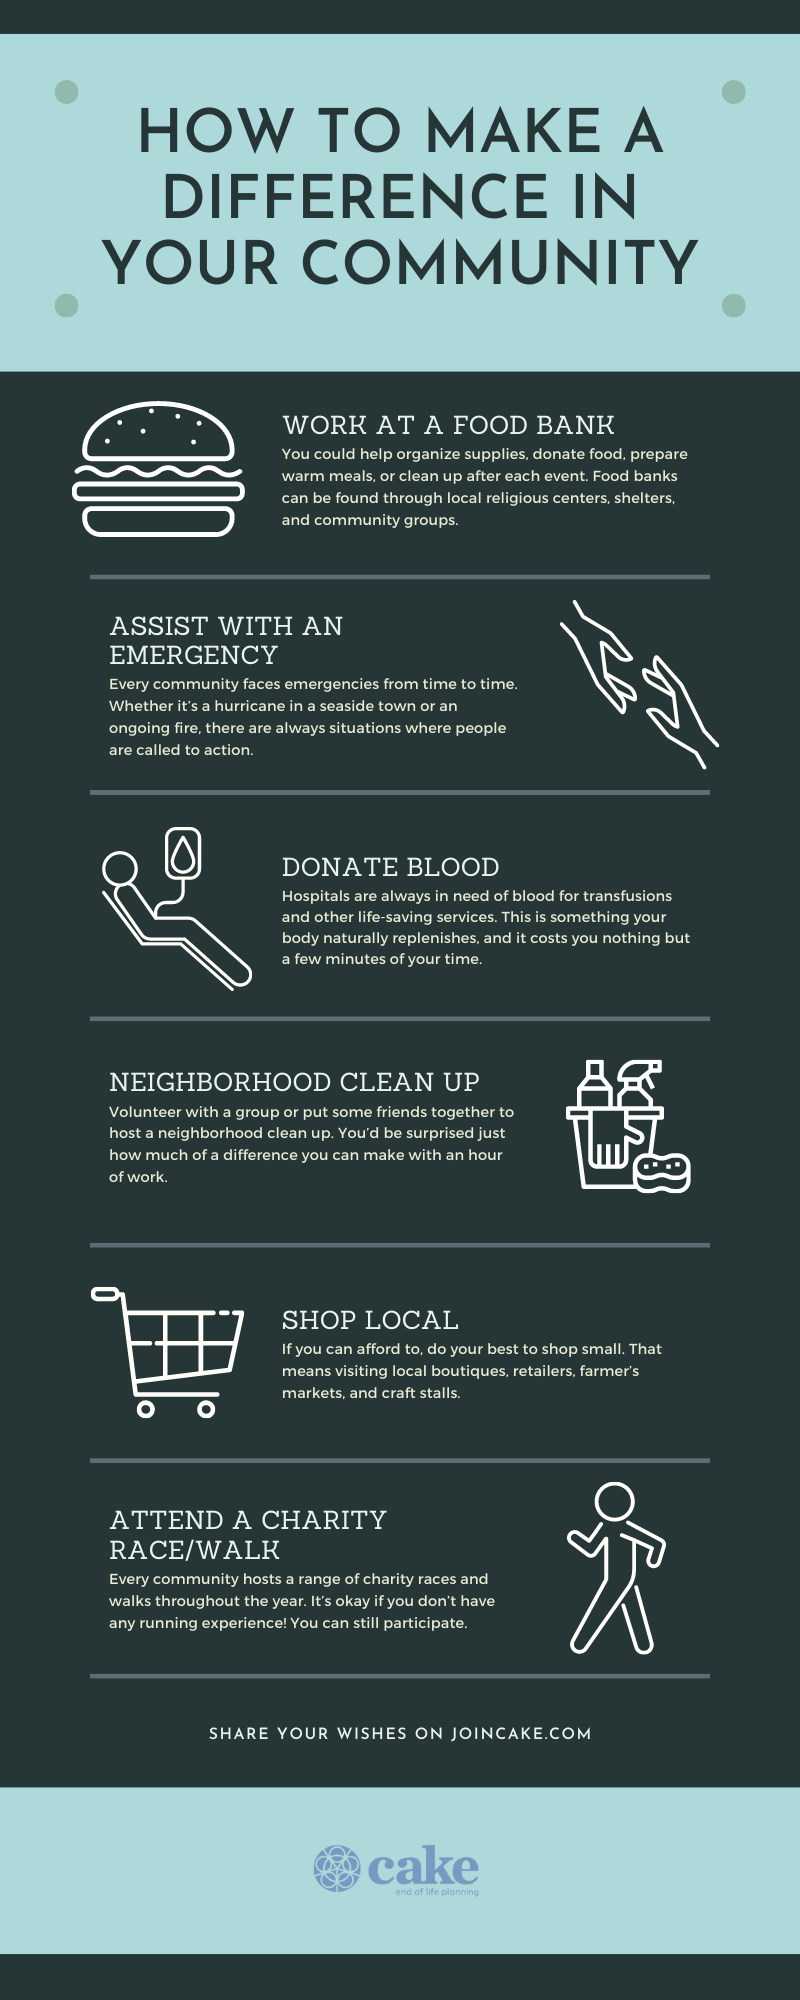 infographic on how to make a difference in your community